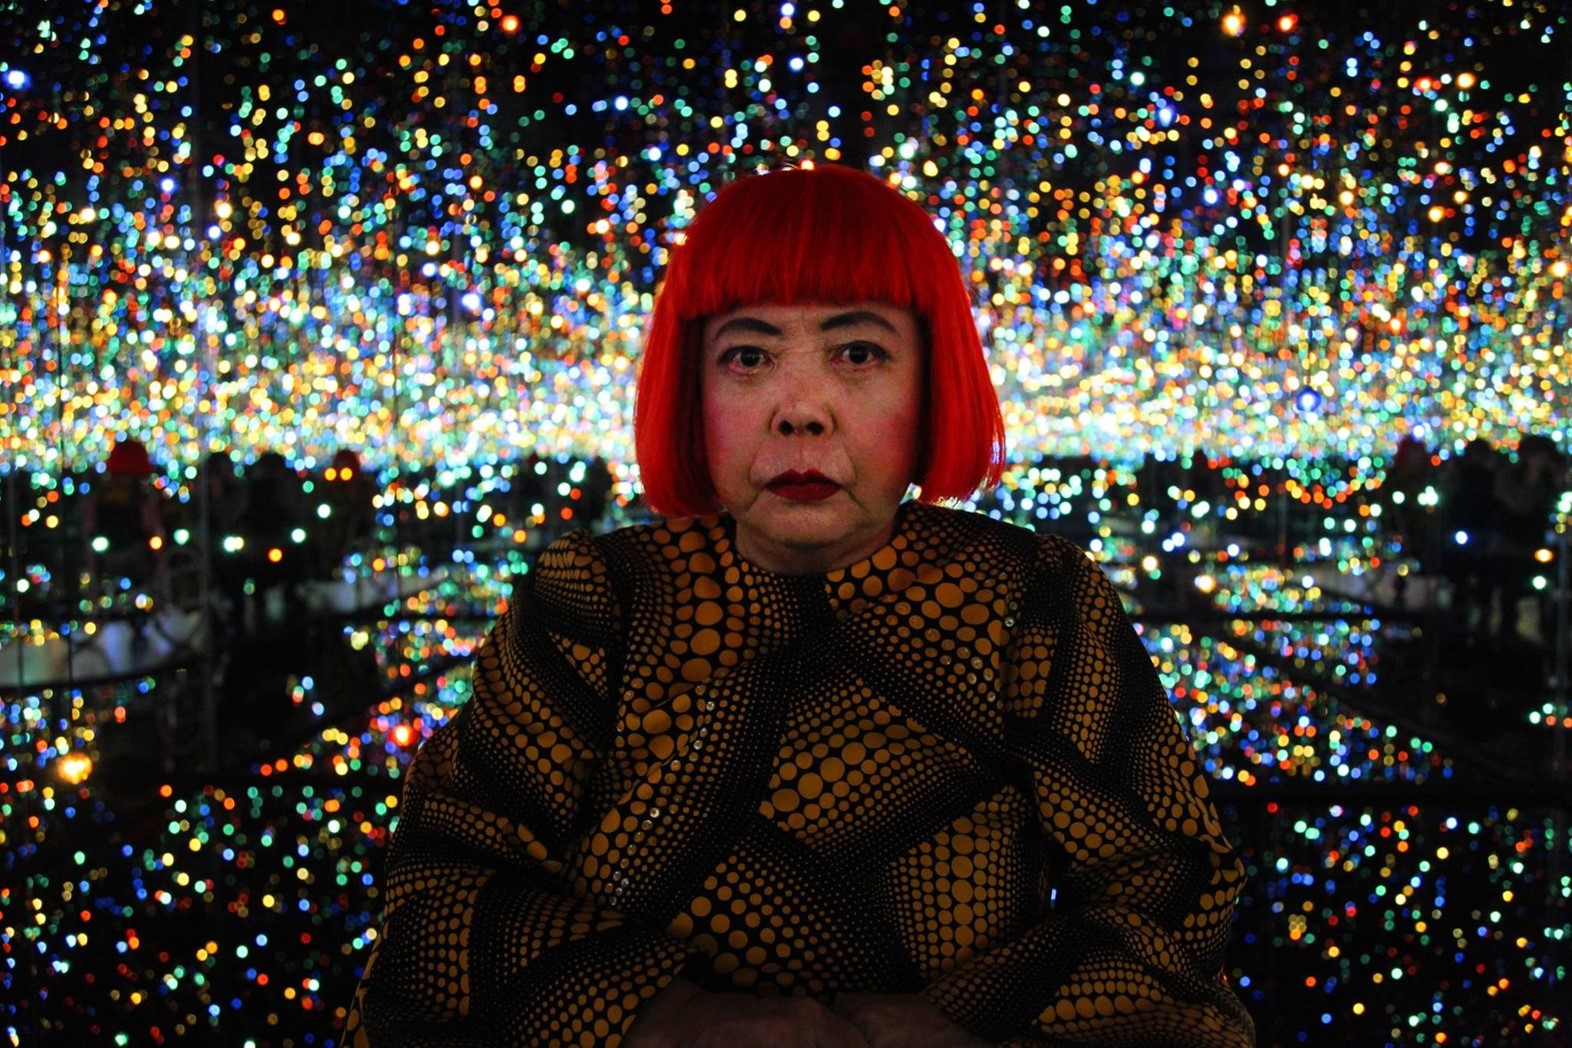 Yayoi Kusama Opens Her All New Infinity Mirror Room In NYC This Weekend -  Secret NYC